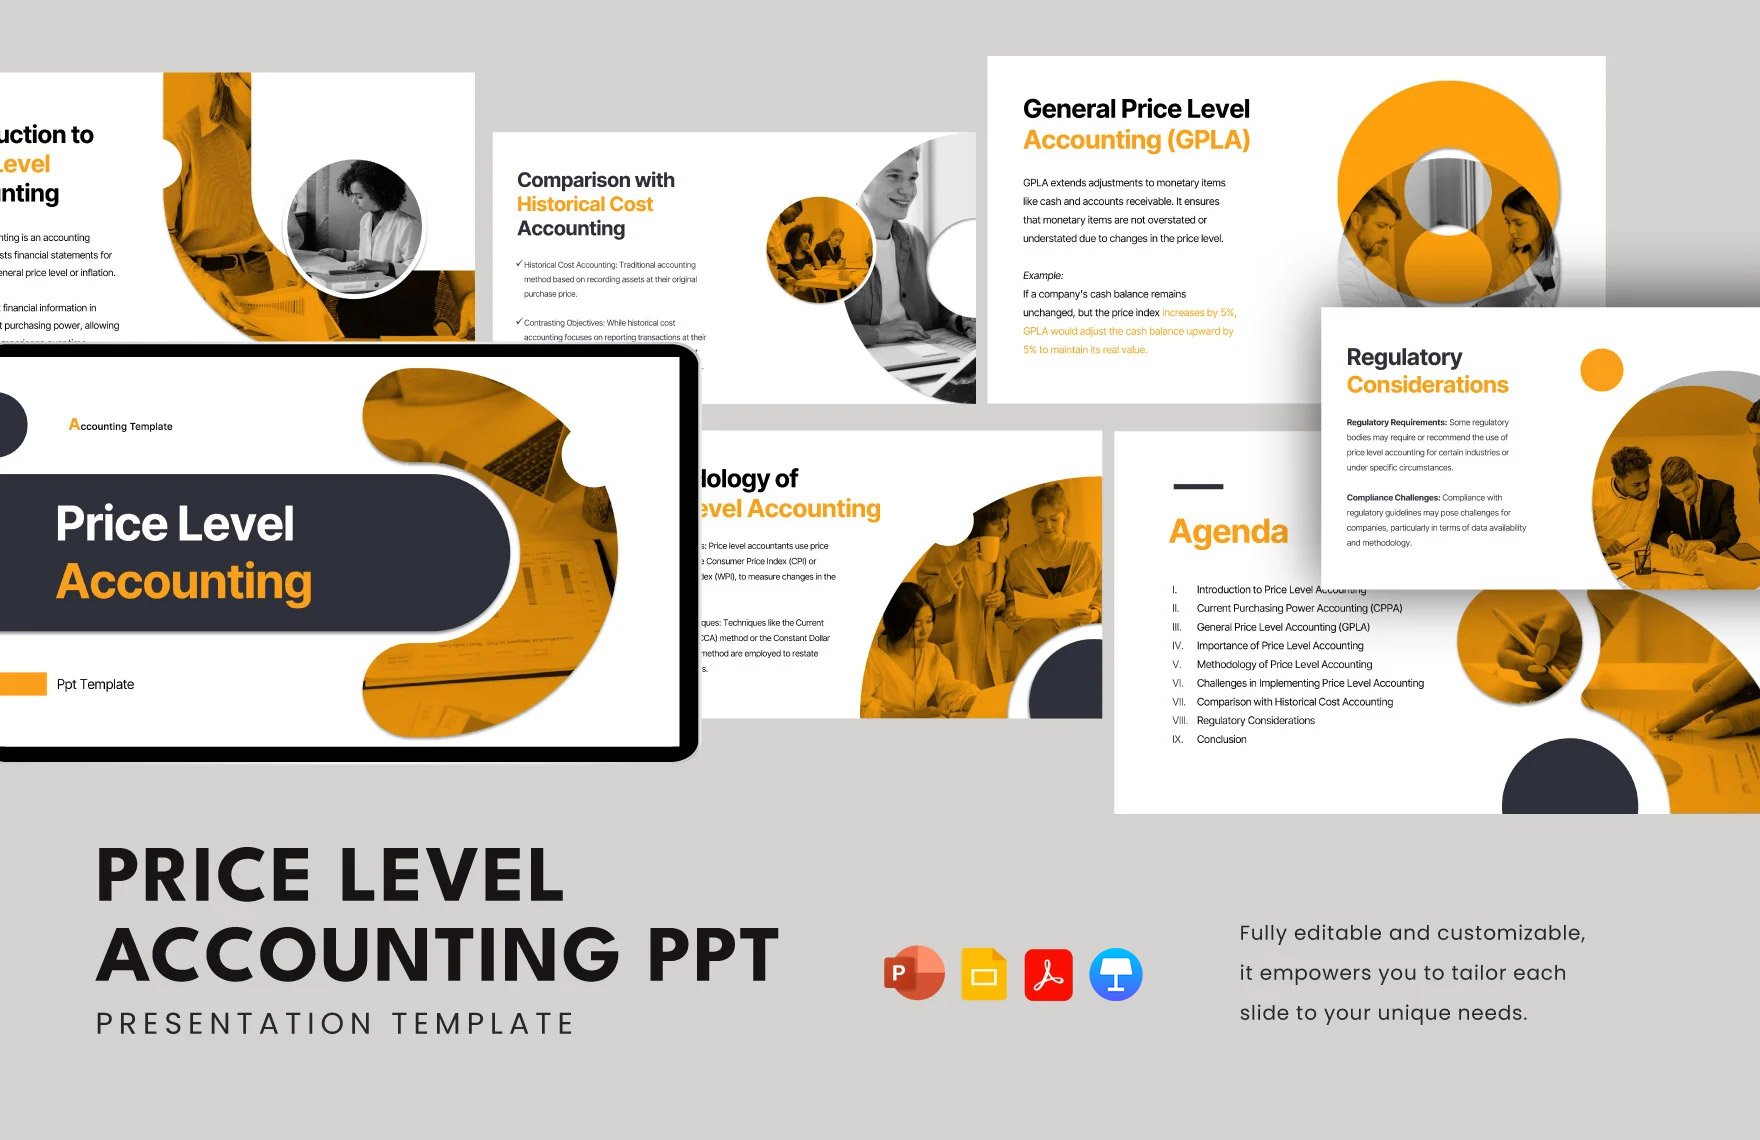 Free Price Level Accounting PPT Template in PDF, PowerPoint, Google Slides, Apple Keynote